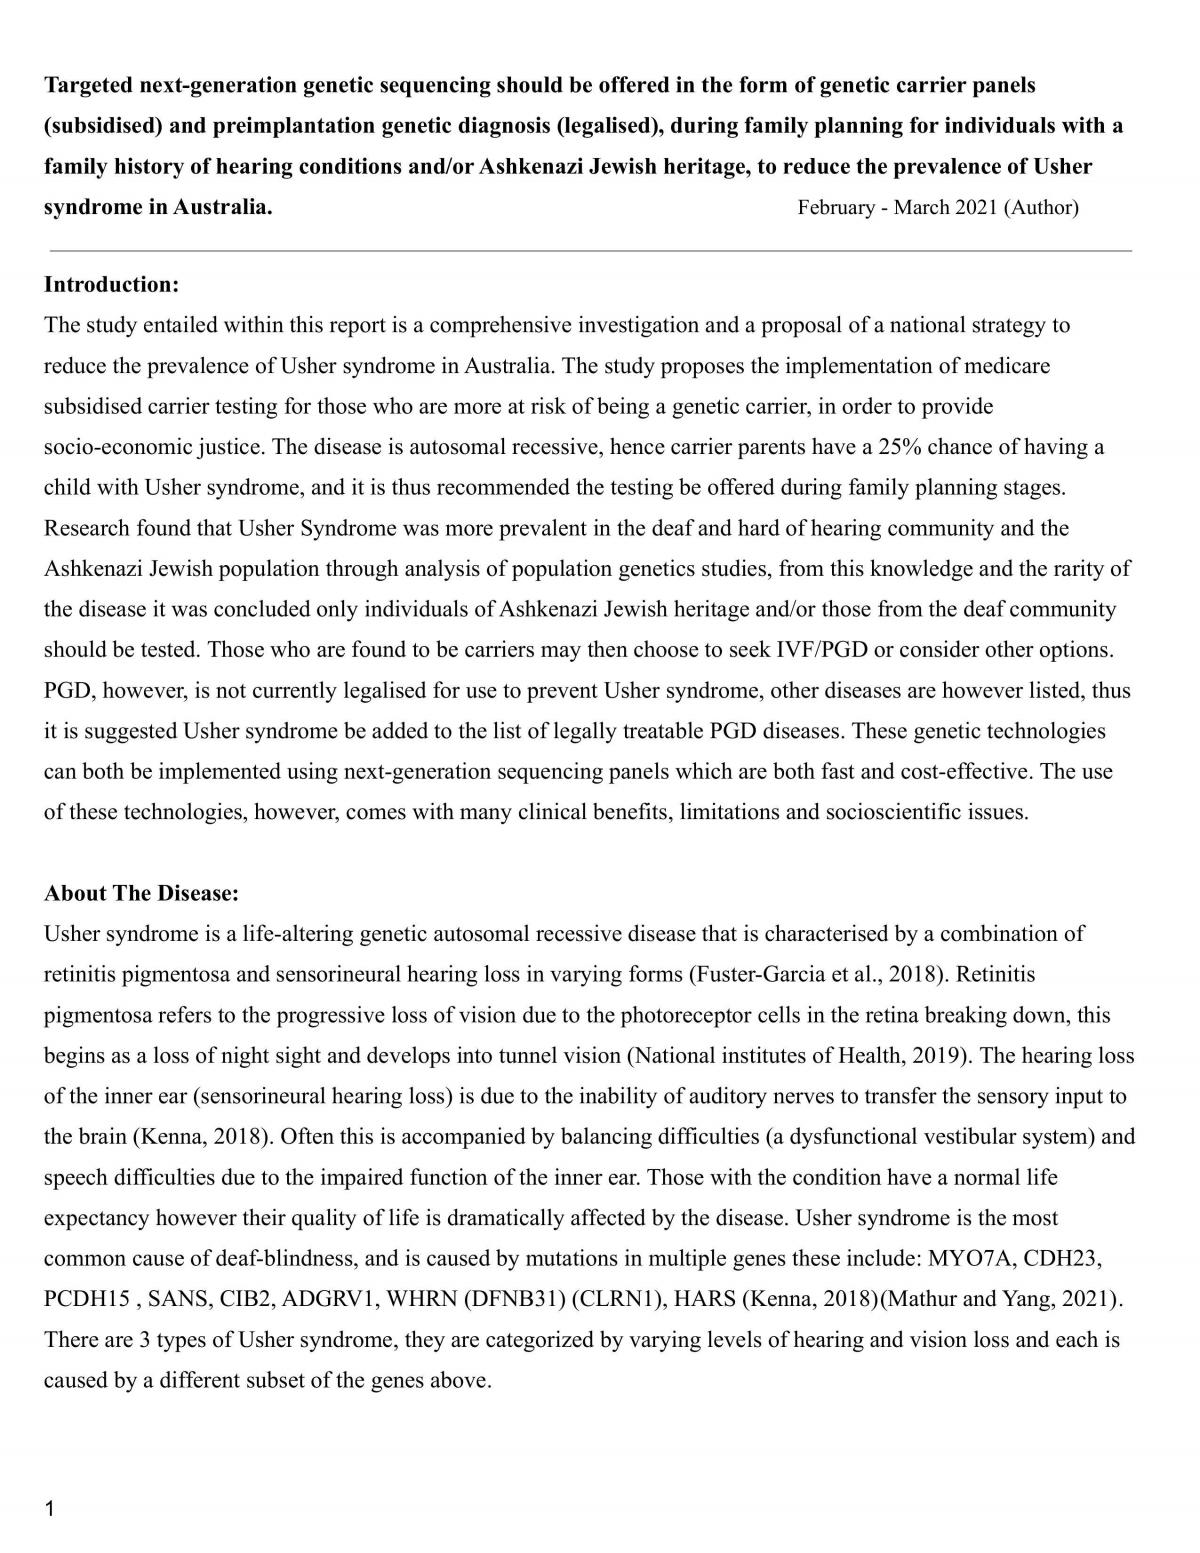 Biology Depth Study - Genetic Diseases - Usher Syndrome Scientific Report  - Page 1